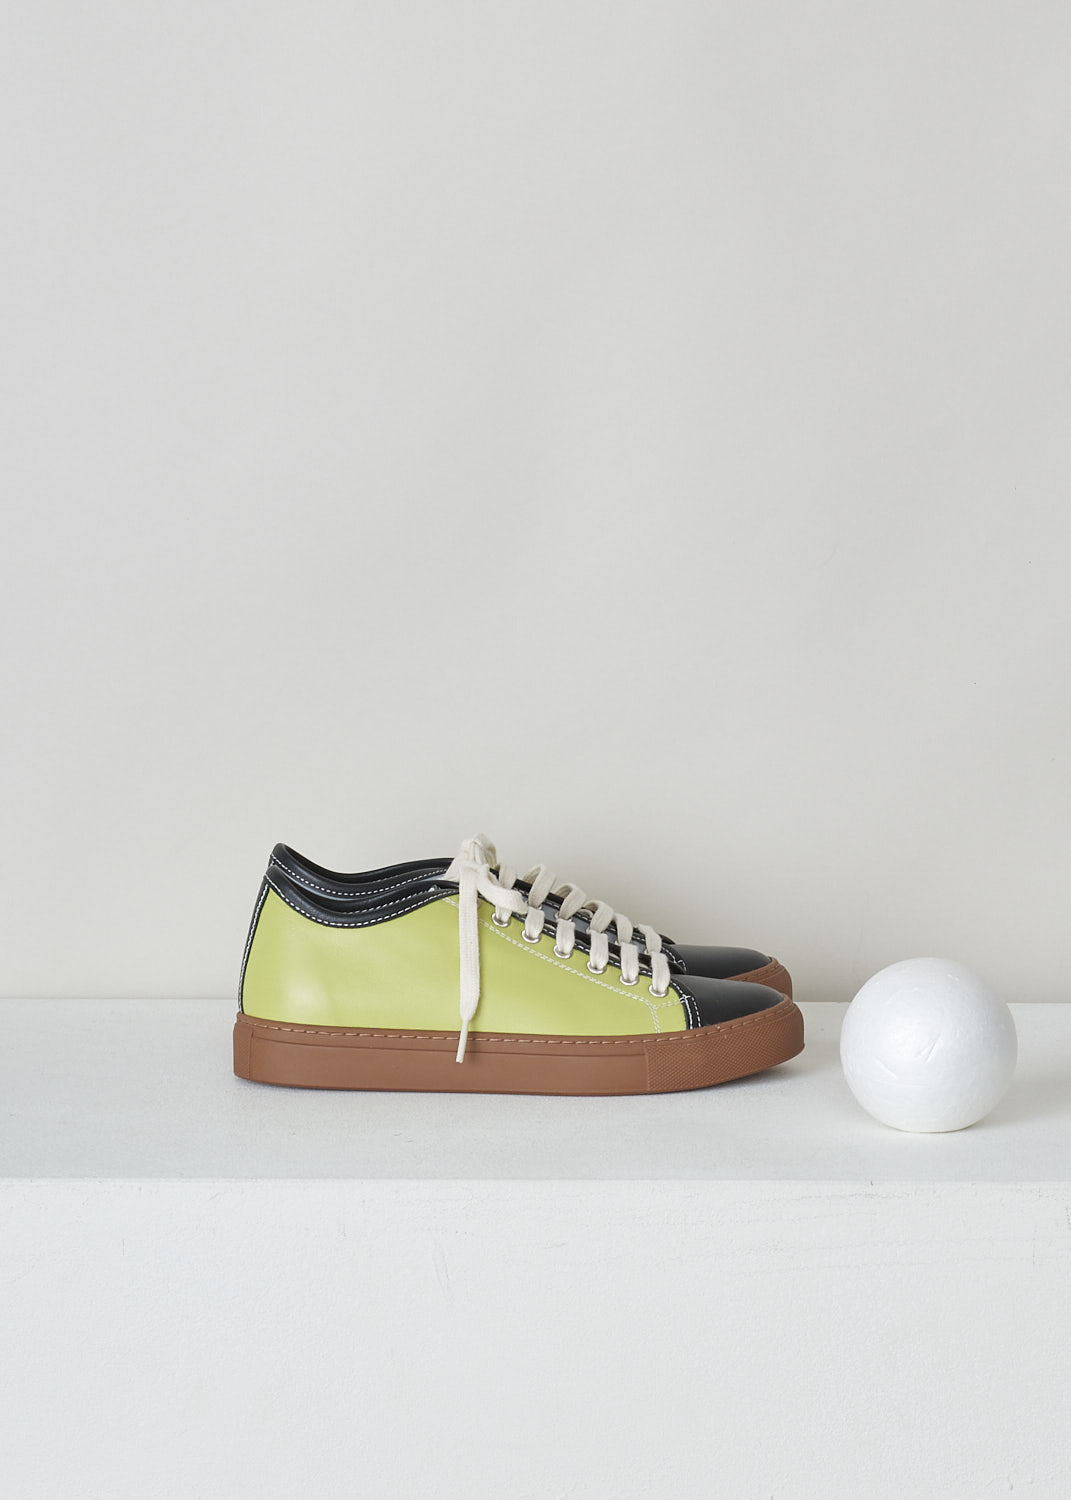 SOFIE D’HOORE, MULTICOLOR LACE-UP FRIDA SNEAKERS, FRIDA_LTHREE_LIME_BLACK_SHARK, Black, Green, Grey, Side, The low-top leather sneakers are made up of three colors: grey, black, and lime green. White contrasting stitching can be found throughout. The sneakers feature front lace-up fastening and a flat brown rubber sole.
